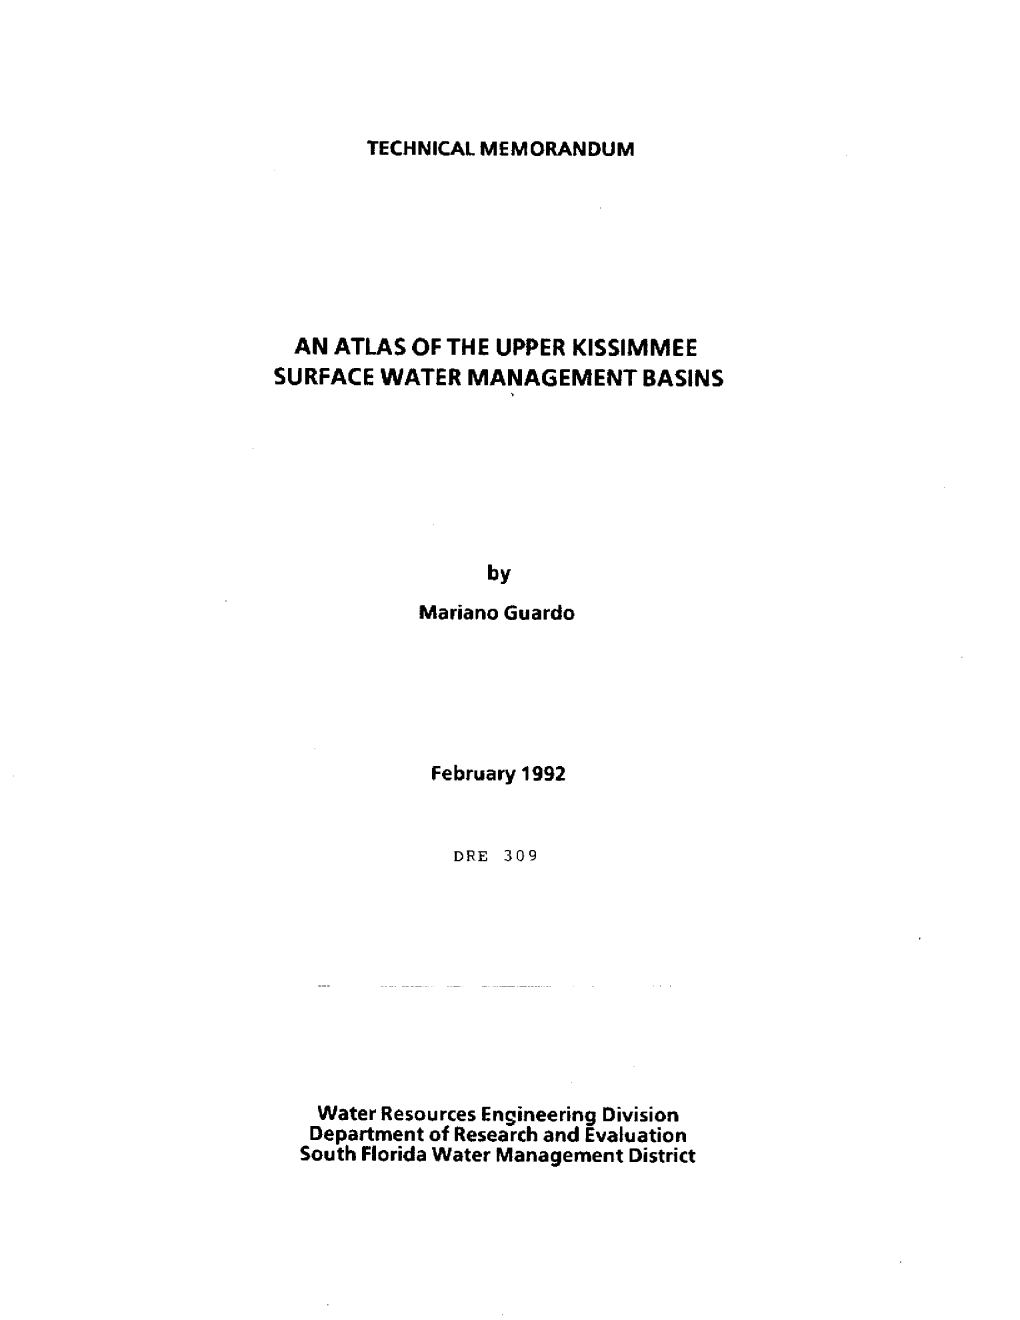 AN ATLAS of the UPPER KISSIMMEE SURFACE WATER MANAGEMENT BASINS By